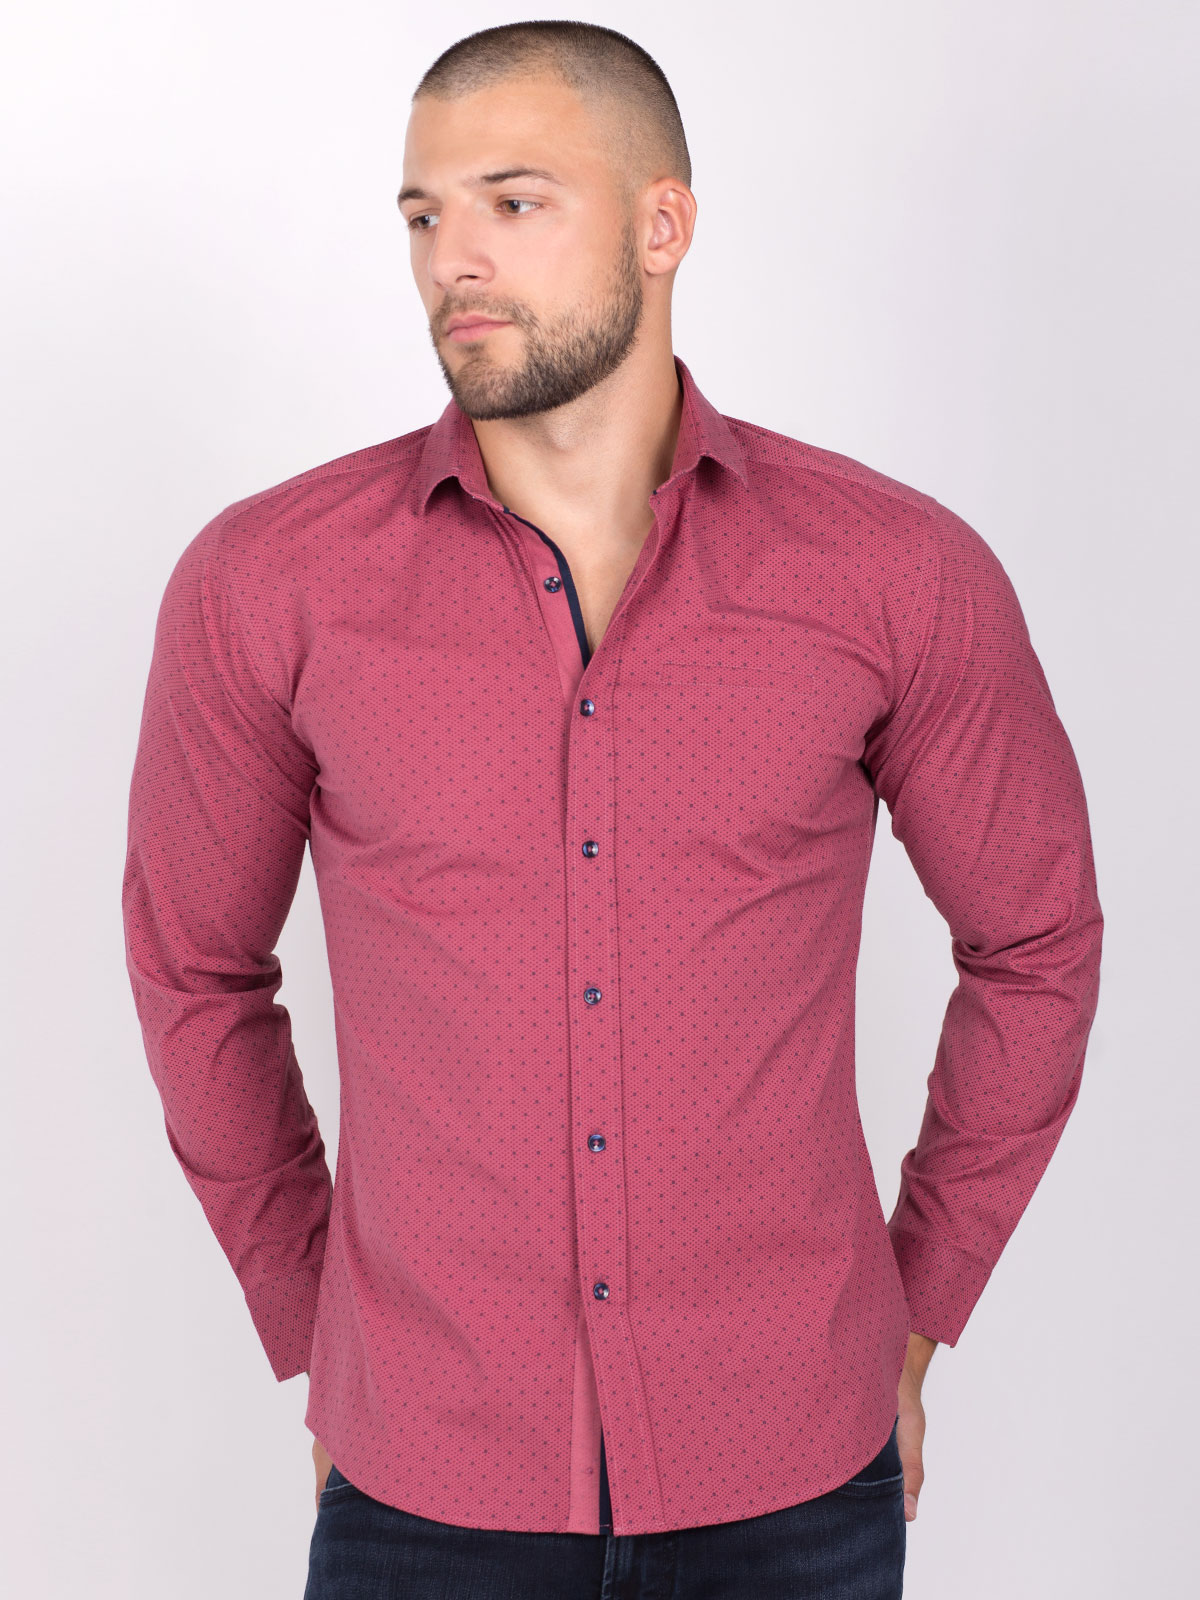 Shirt in cherry color with a print of fi - 21510 € 43.87 img2